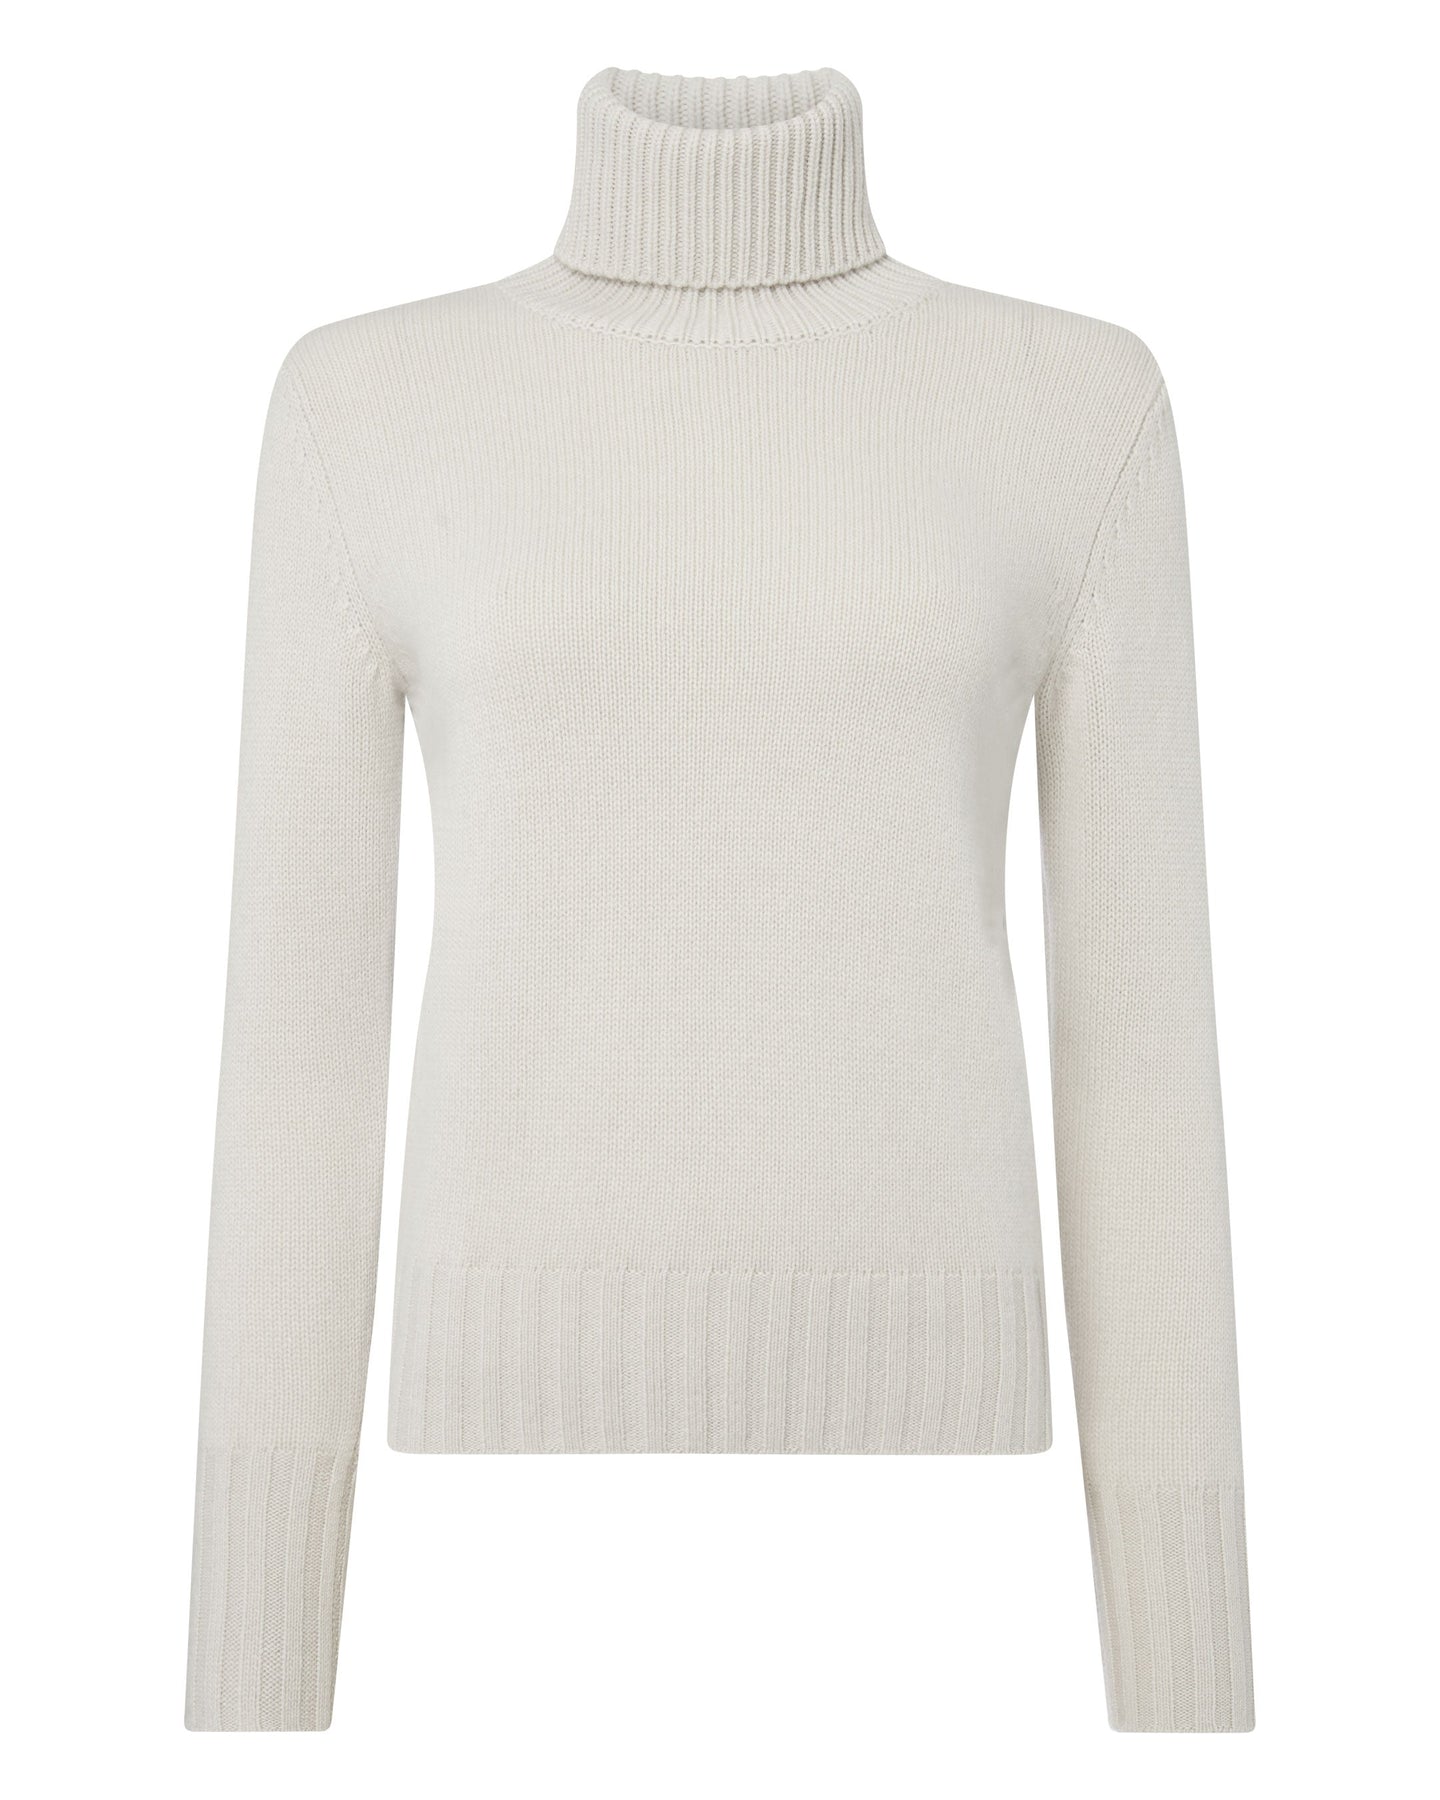 N.Peal Women's Chunky Turtle Neck Cashmere Sweater Snow Grey